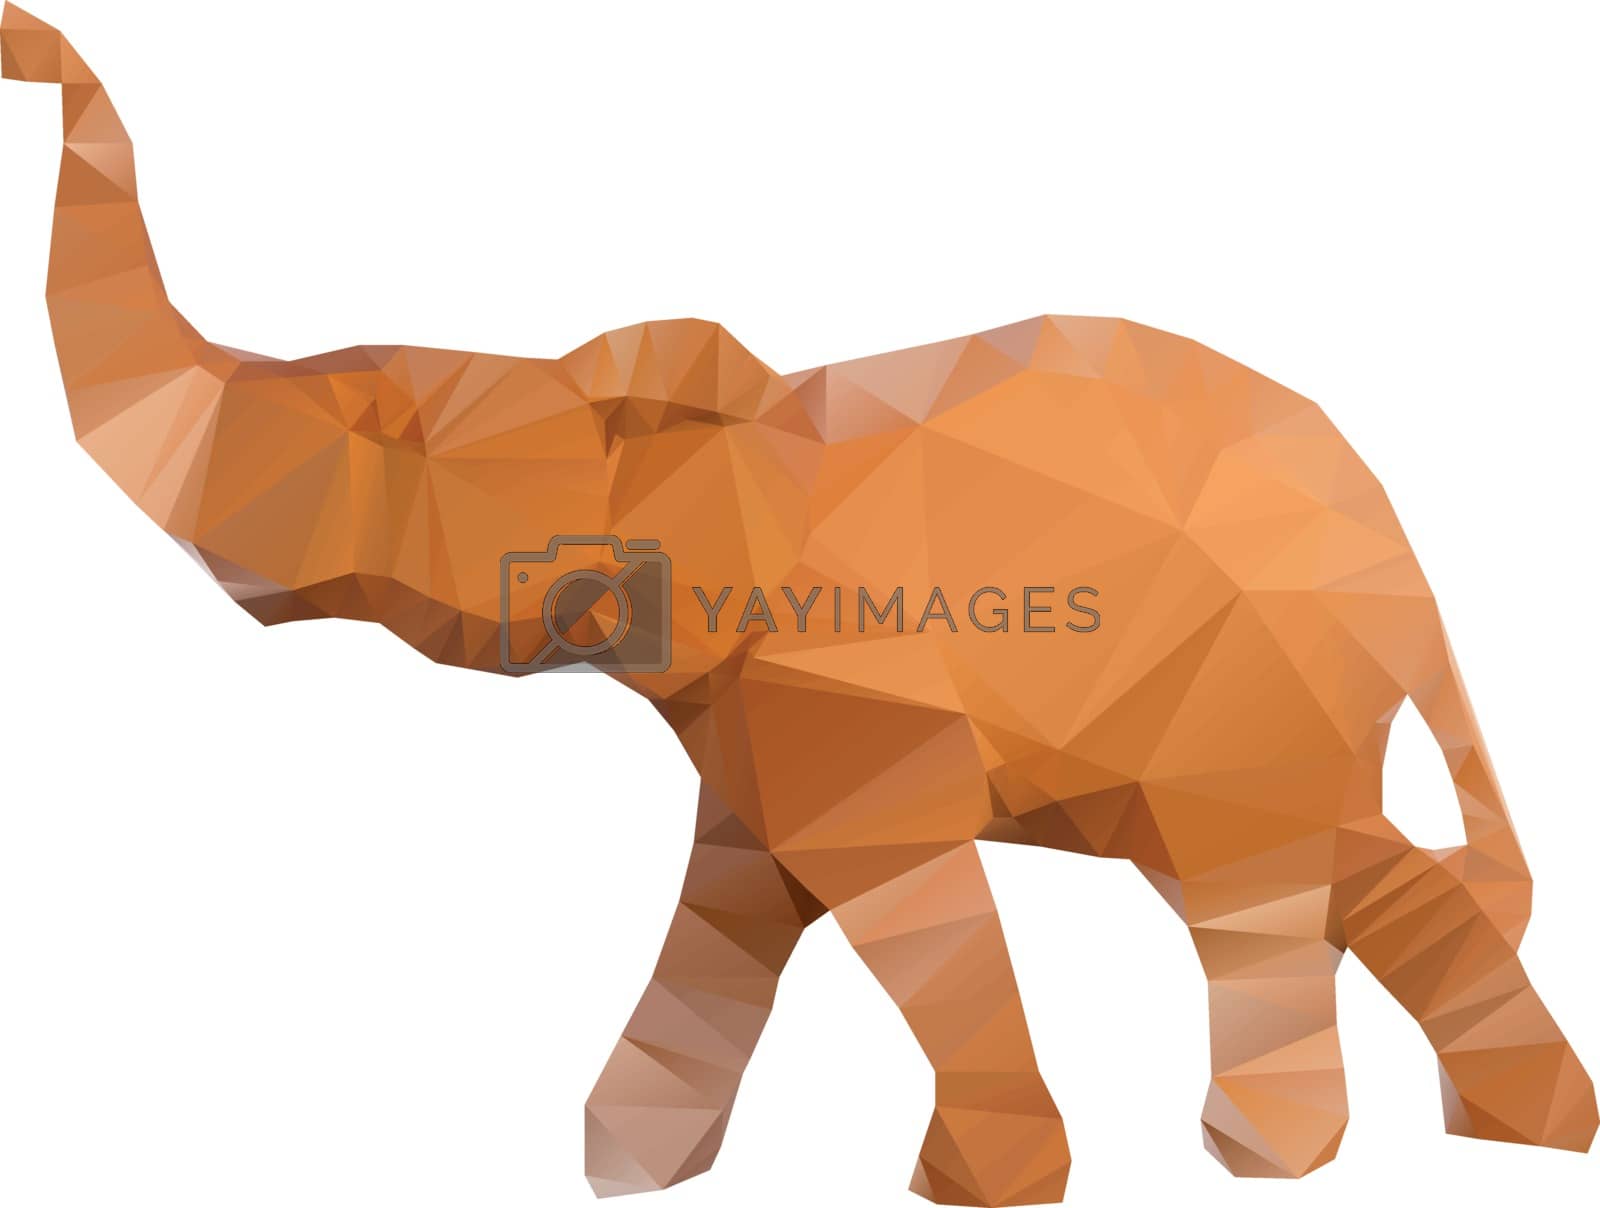 Royalty free image of Polygonal illustration of head of elephant isolated on white background by gigra